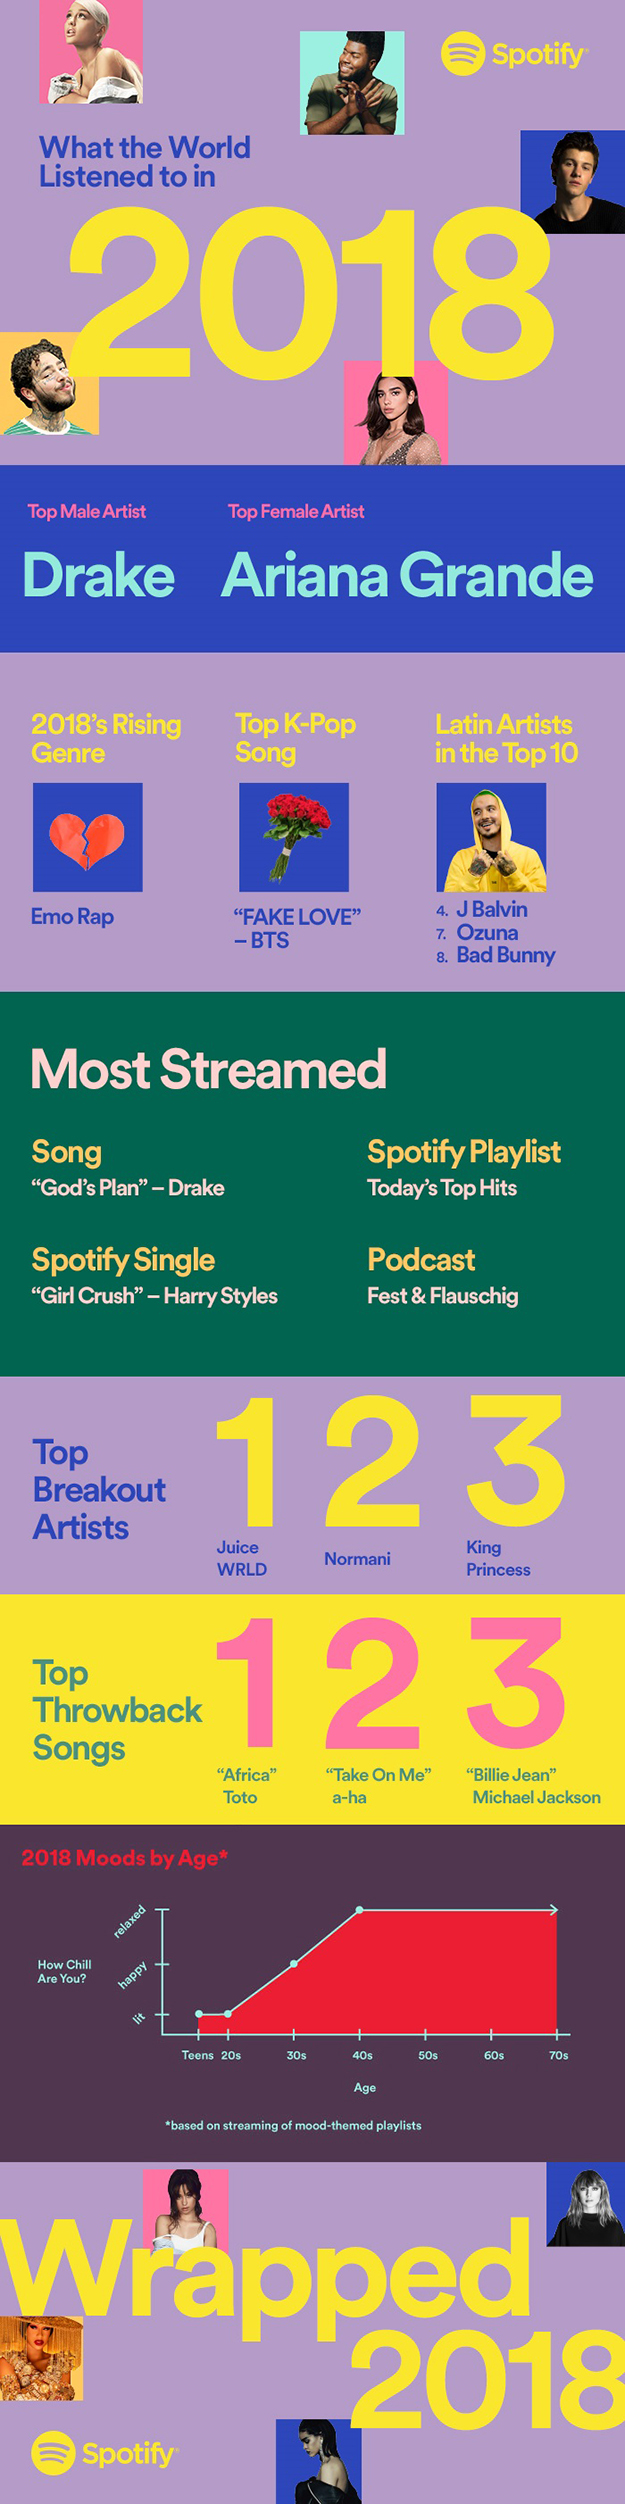 Spotify 2018 infographic